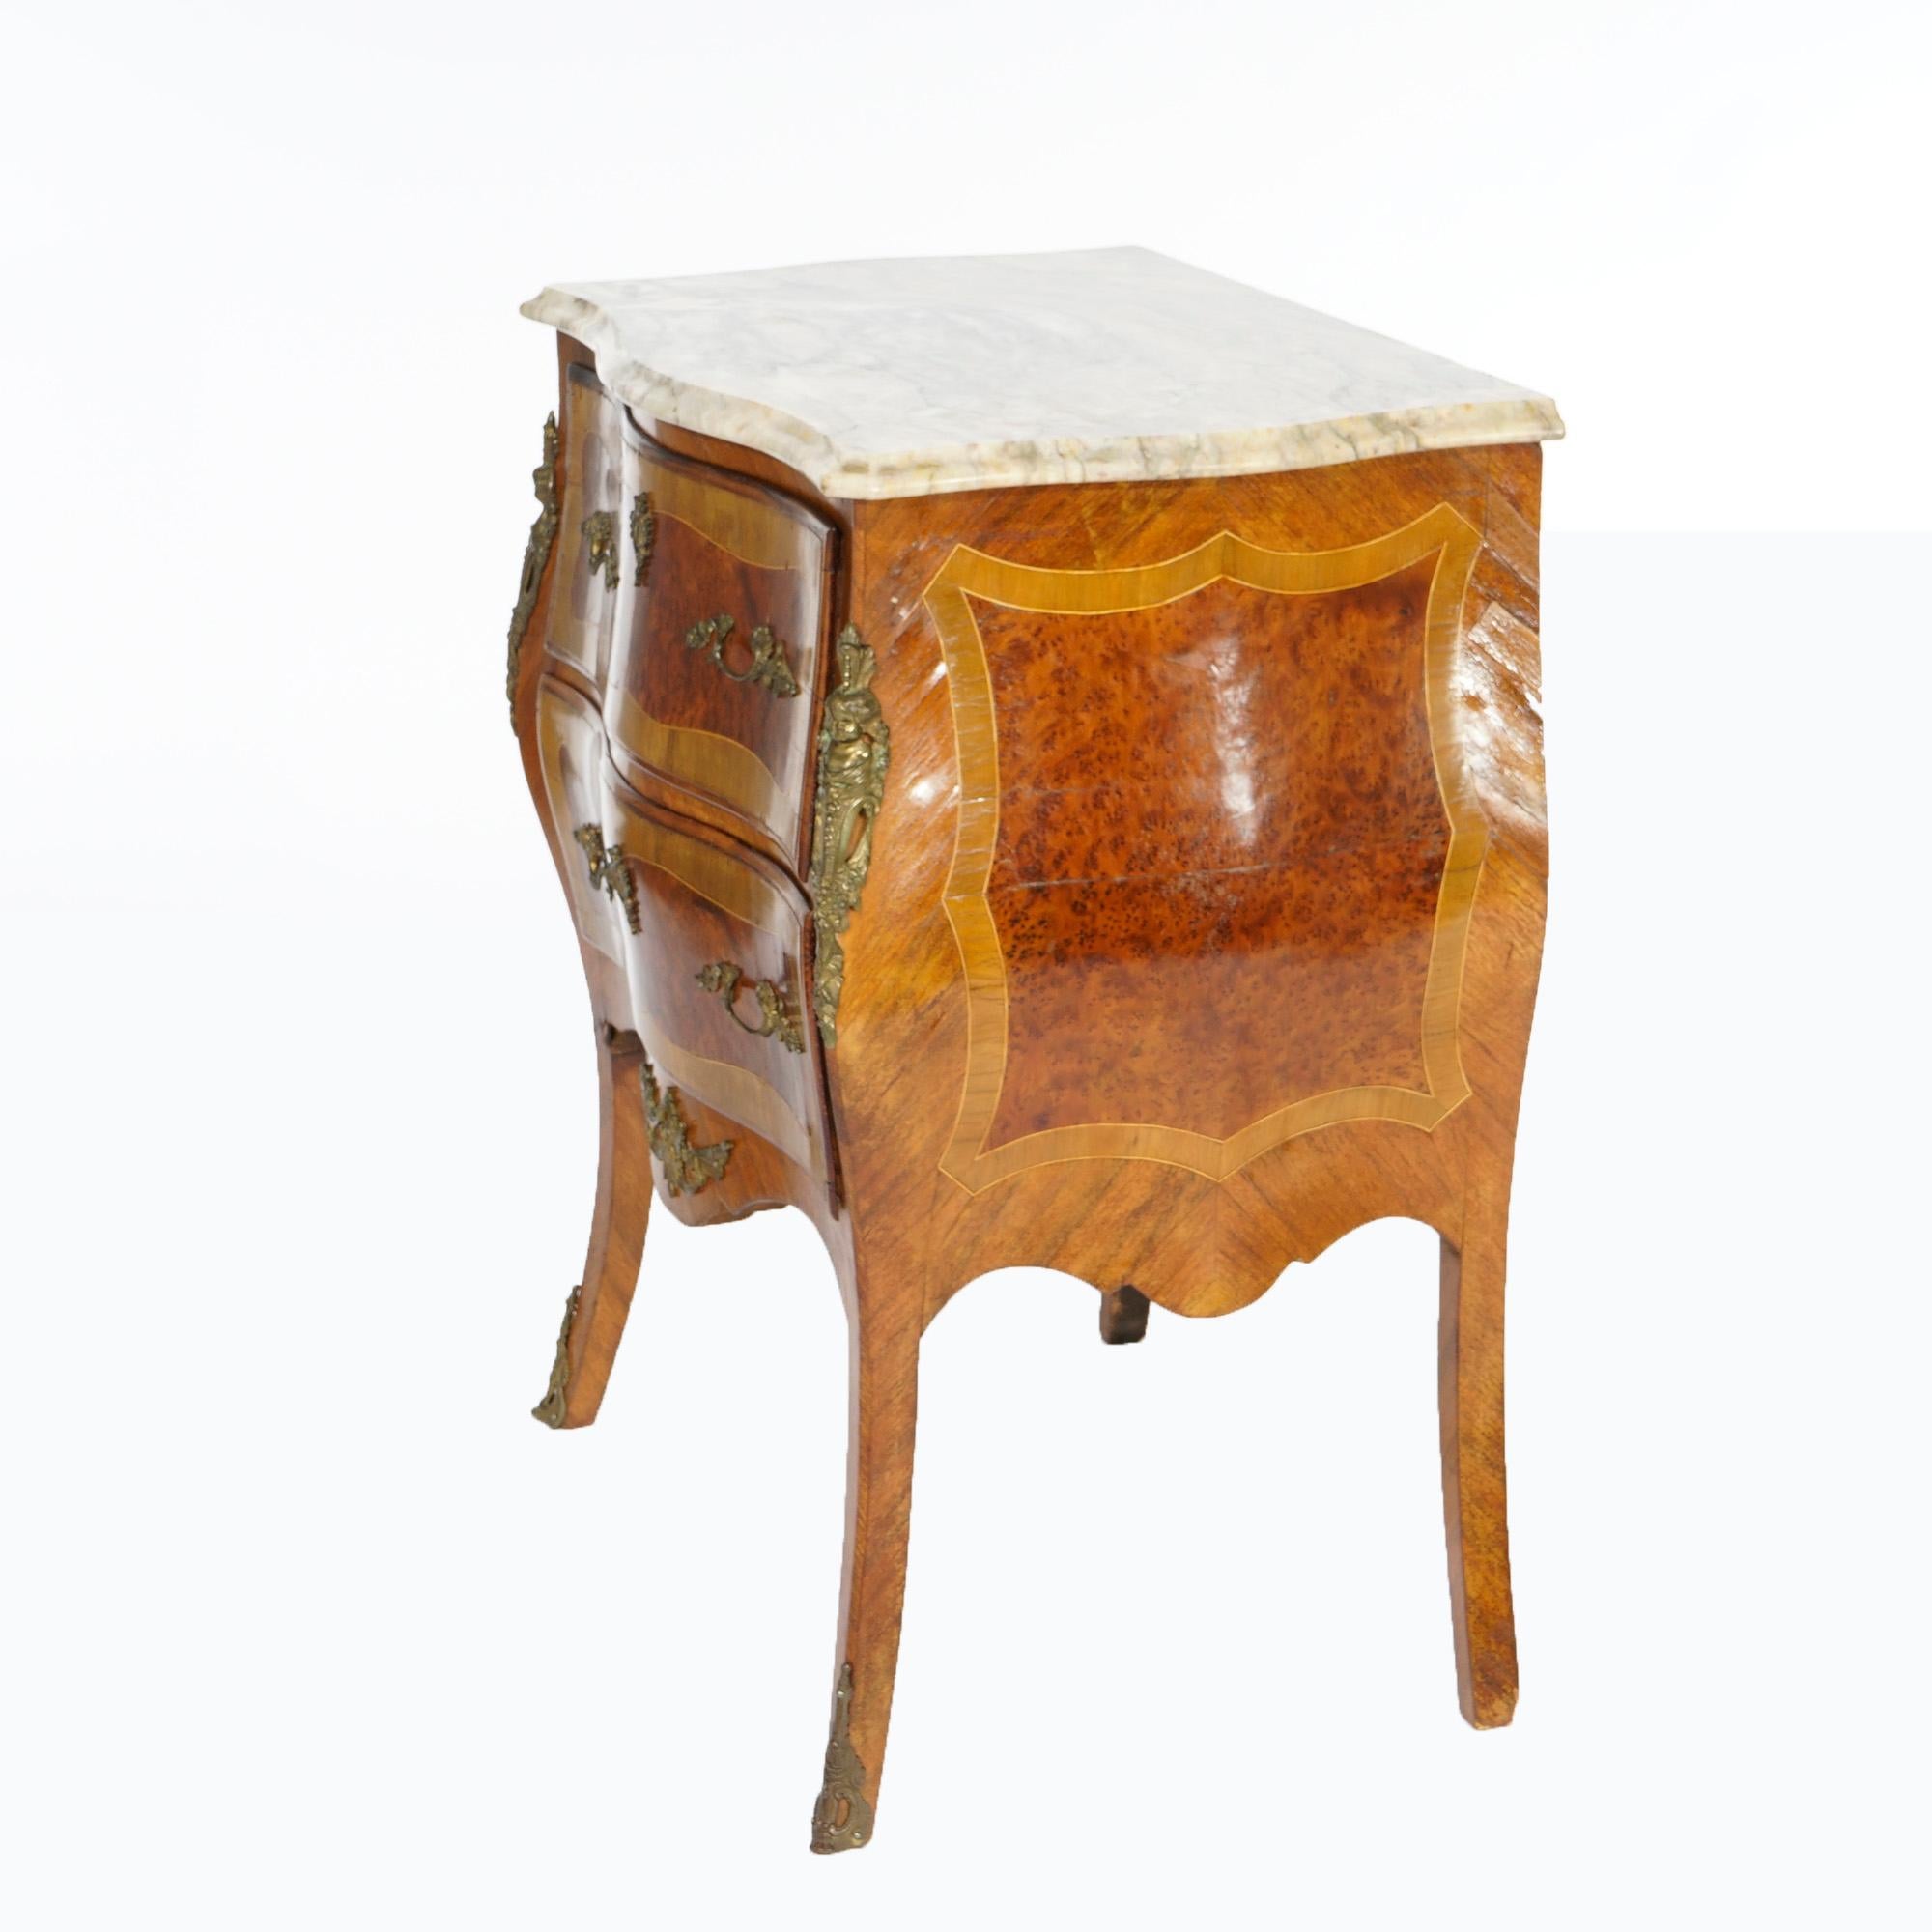 20th Century Antique French Kingwood & Rosewood Marble Top Commode with Ormolu, Circa 1910 For Sale